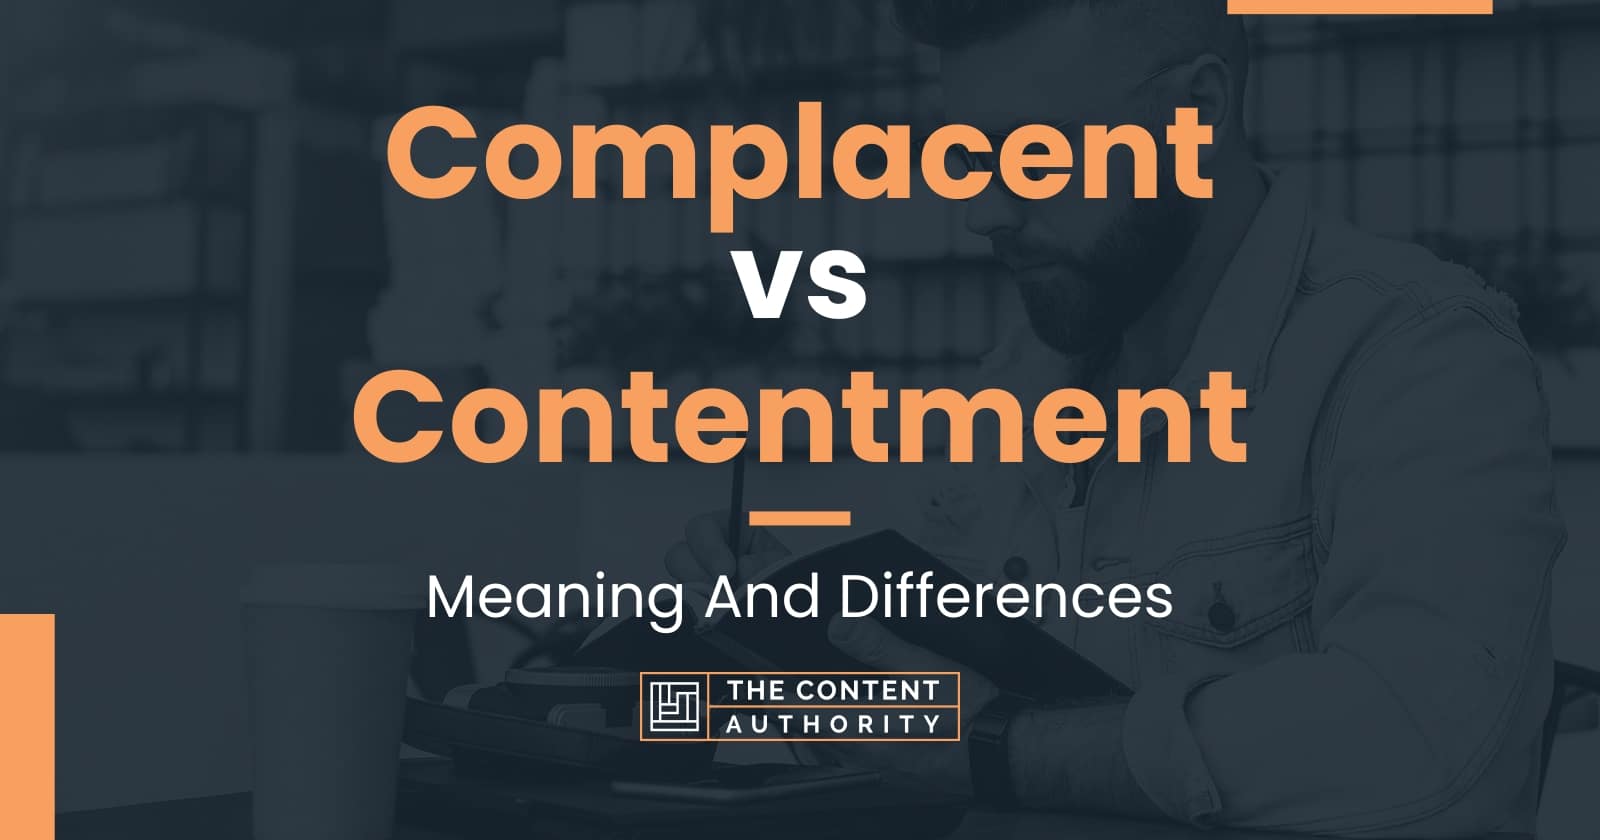 Contentment vs Complacency